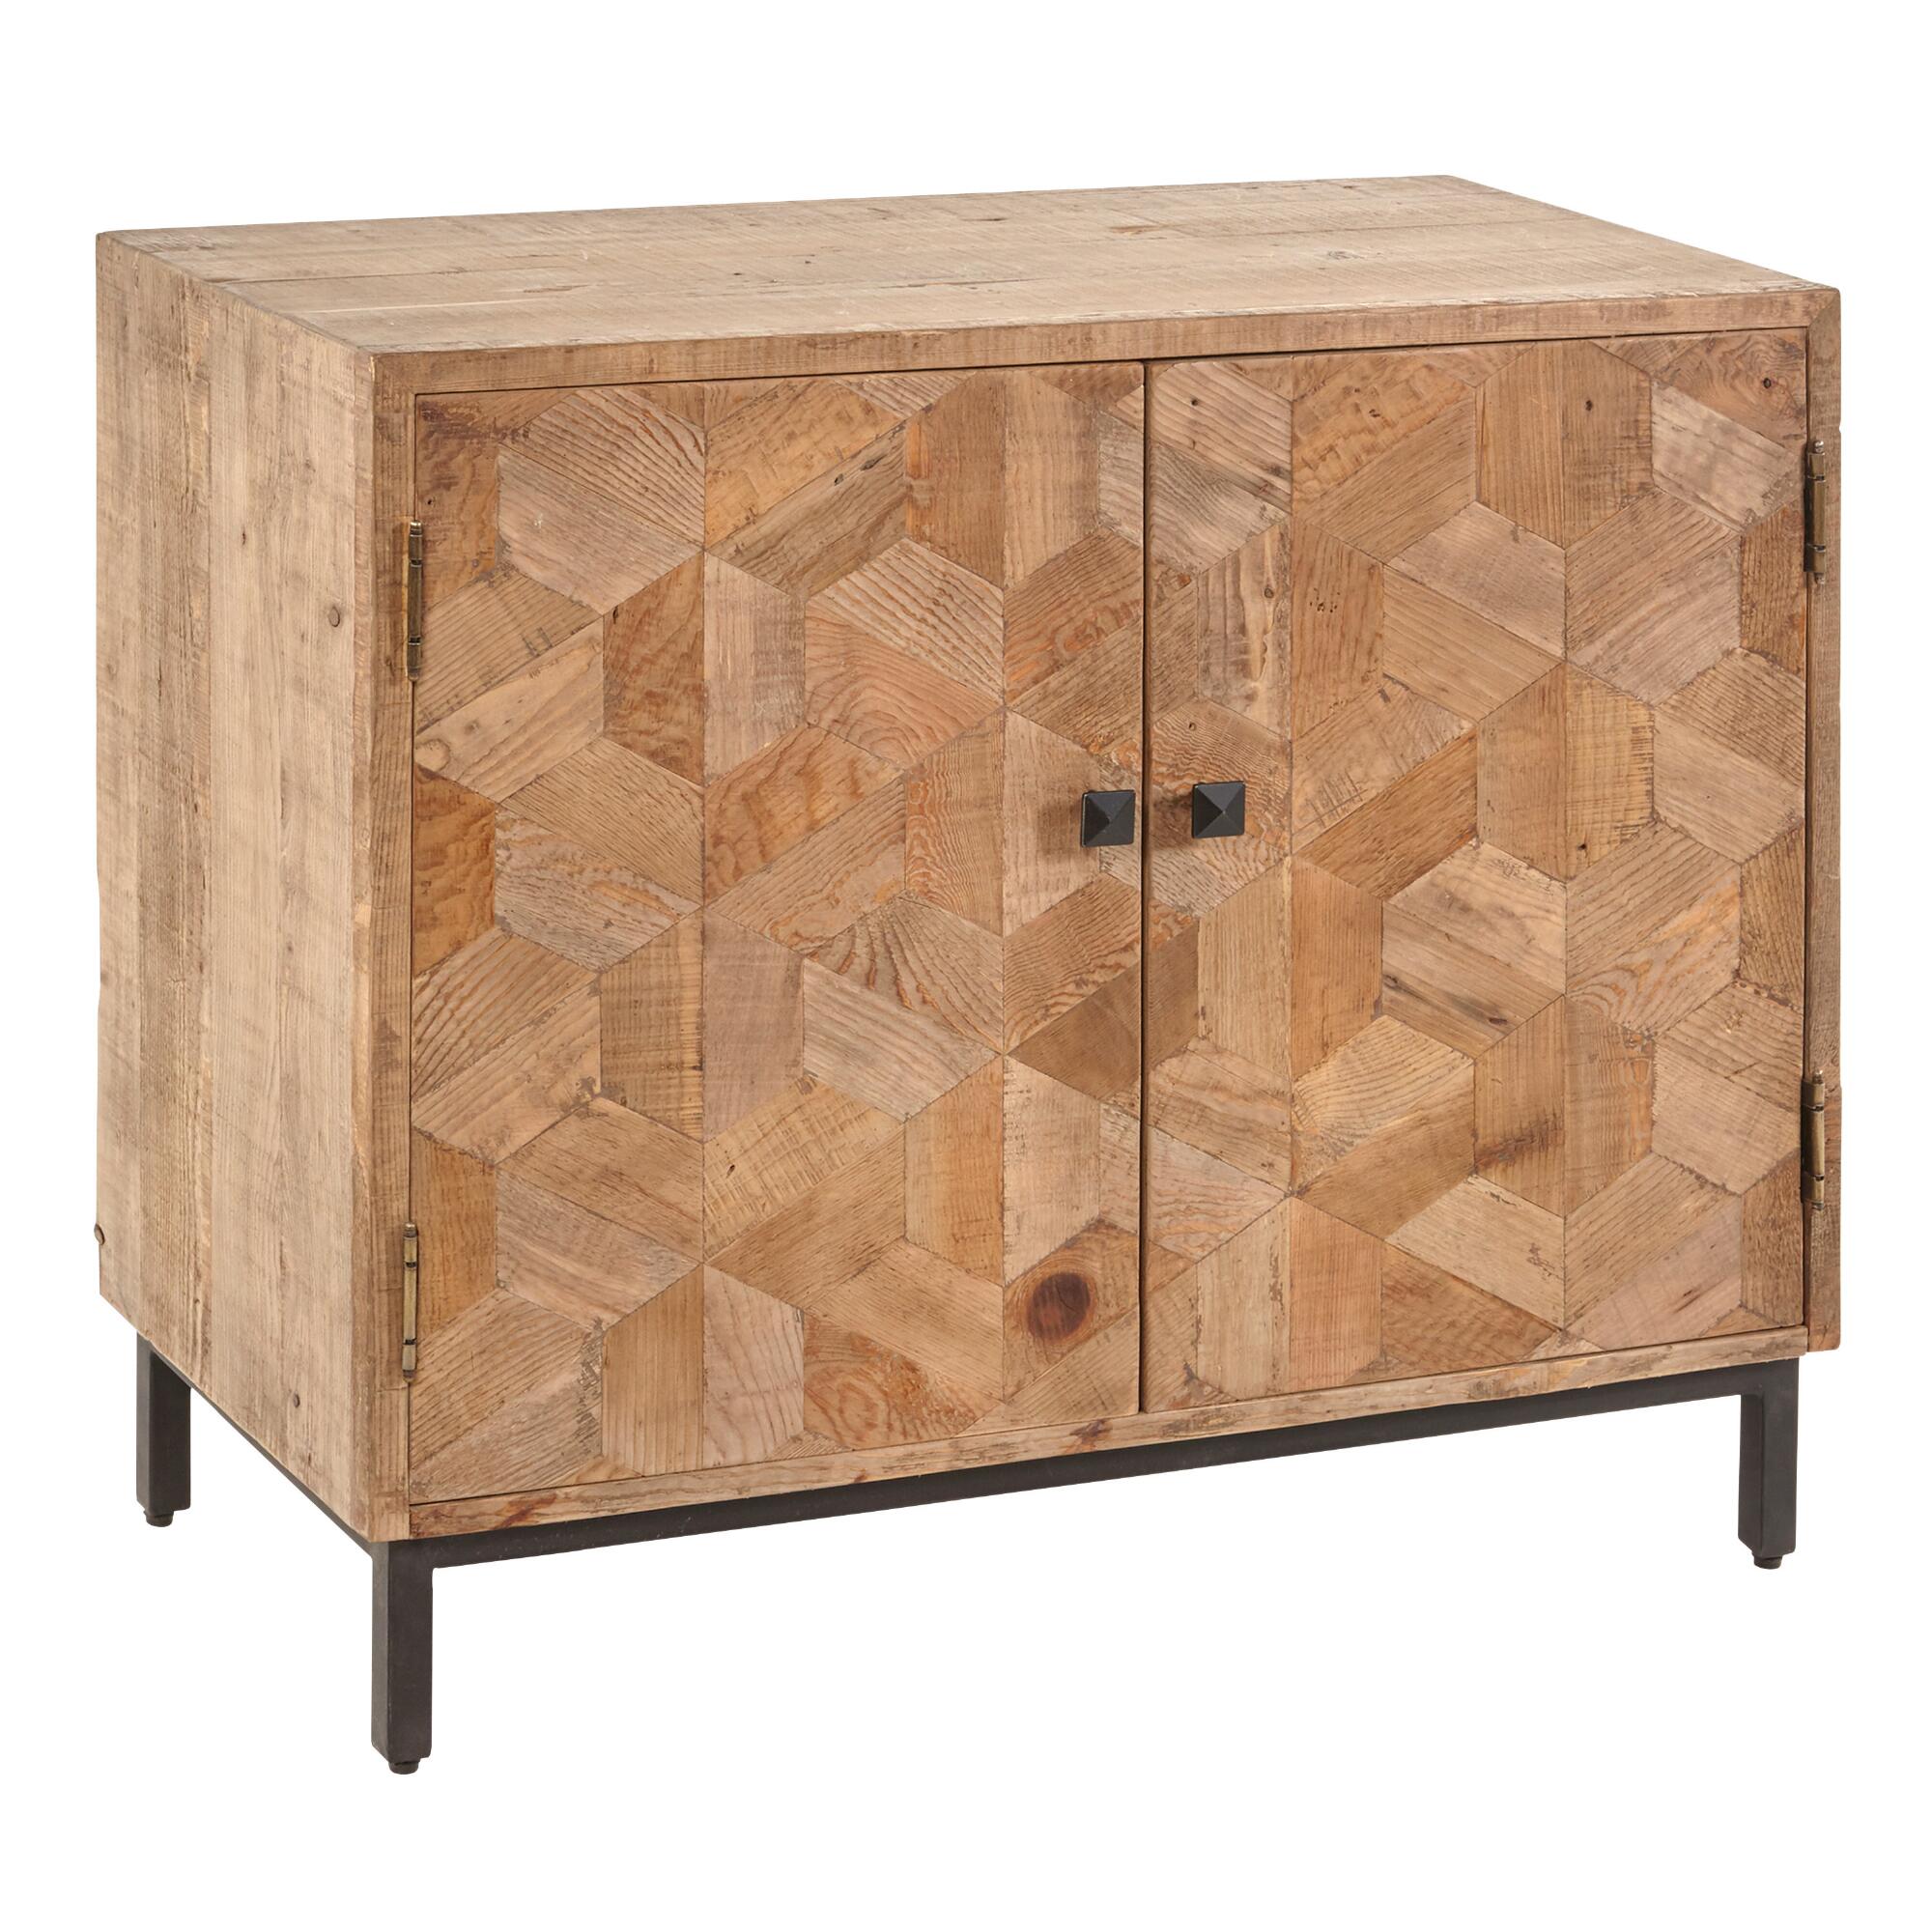 Reclaimed Pine and Metal Anders Storage Cabinet - Wood by World Market